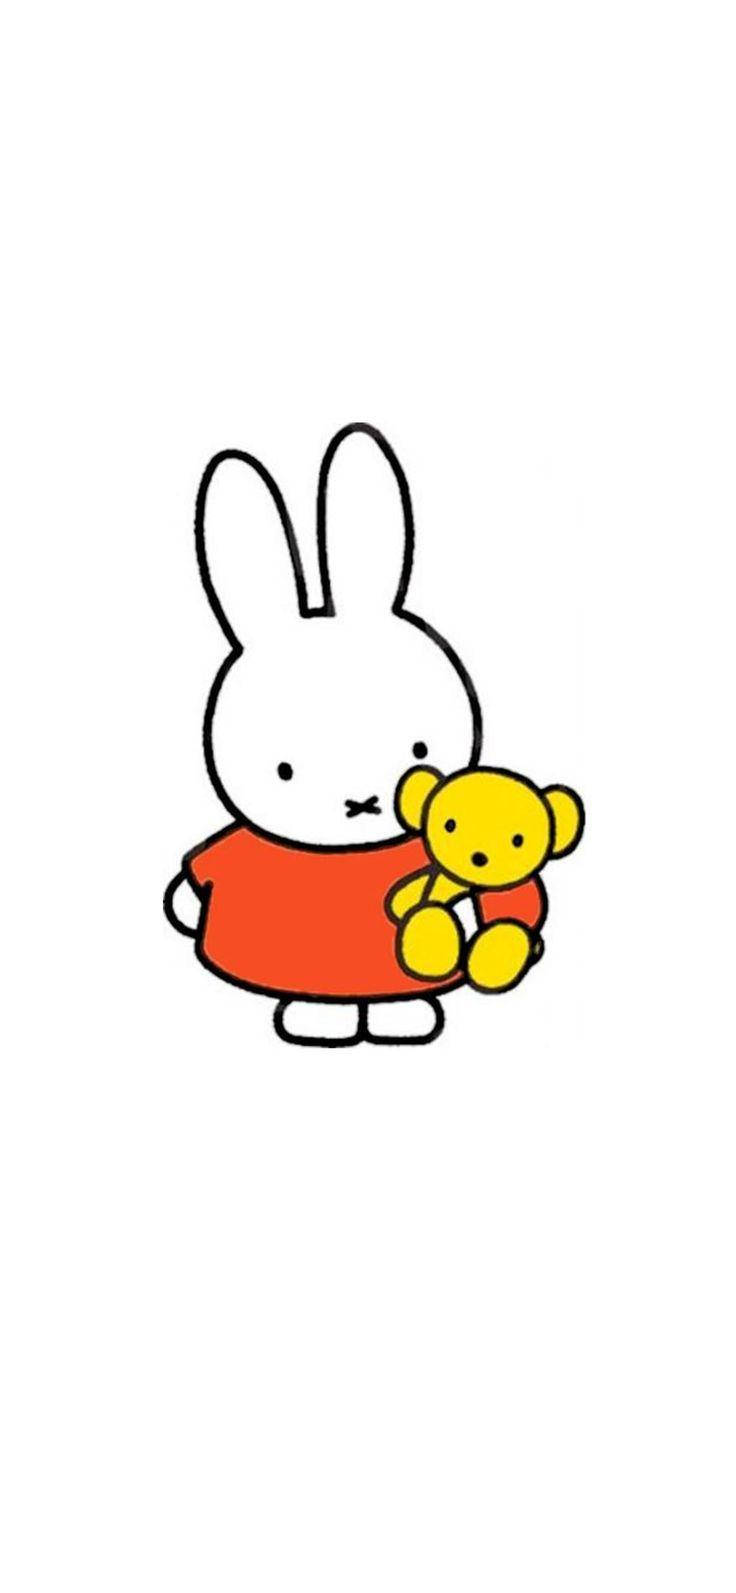 Miffy And Yellow Teddy Bear Wallpaper